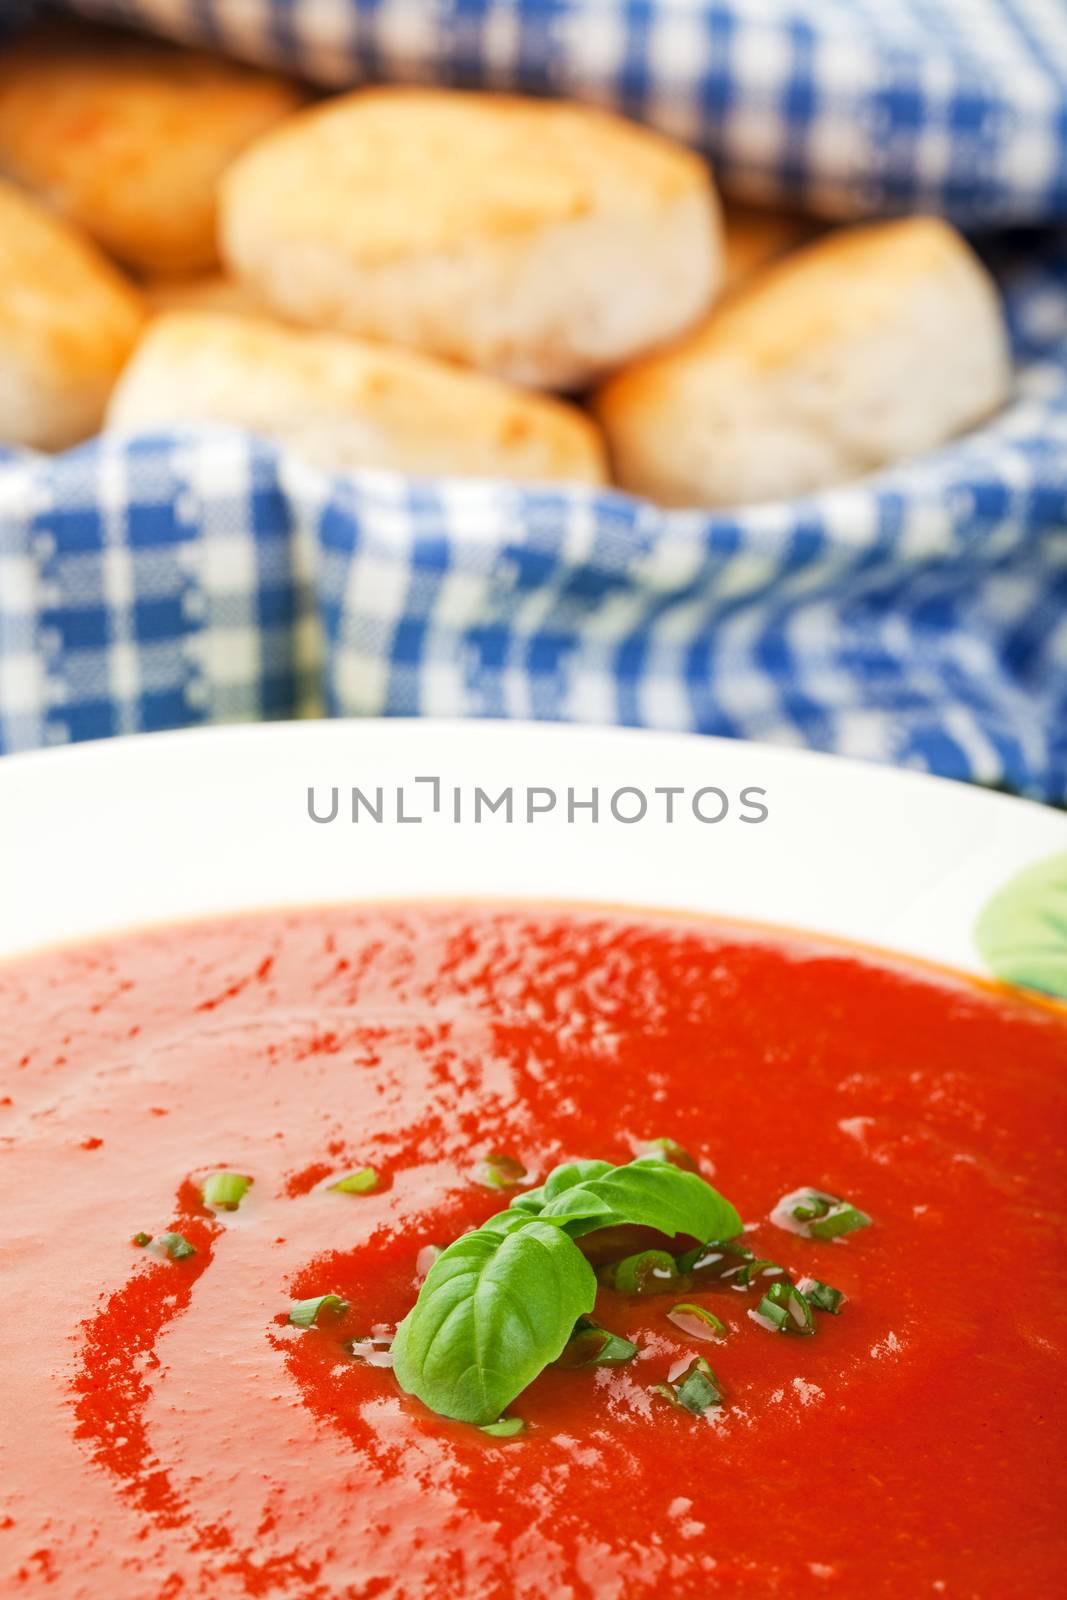 Tomato soup garnished with chives and a sprig of basil, with a basket of country fresh biscuits in the background.  Selective focus on basil.  Shallow dof.